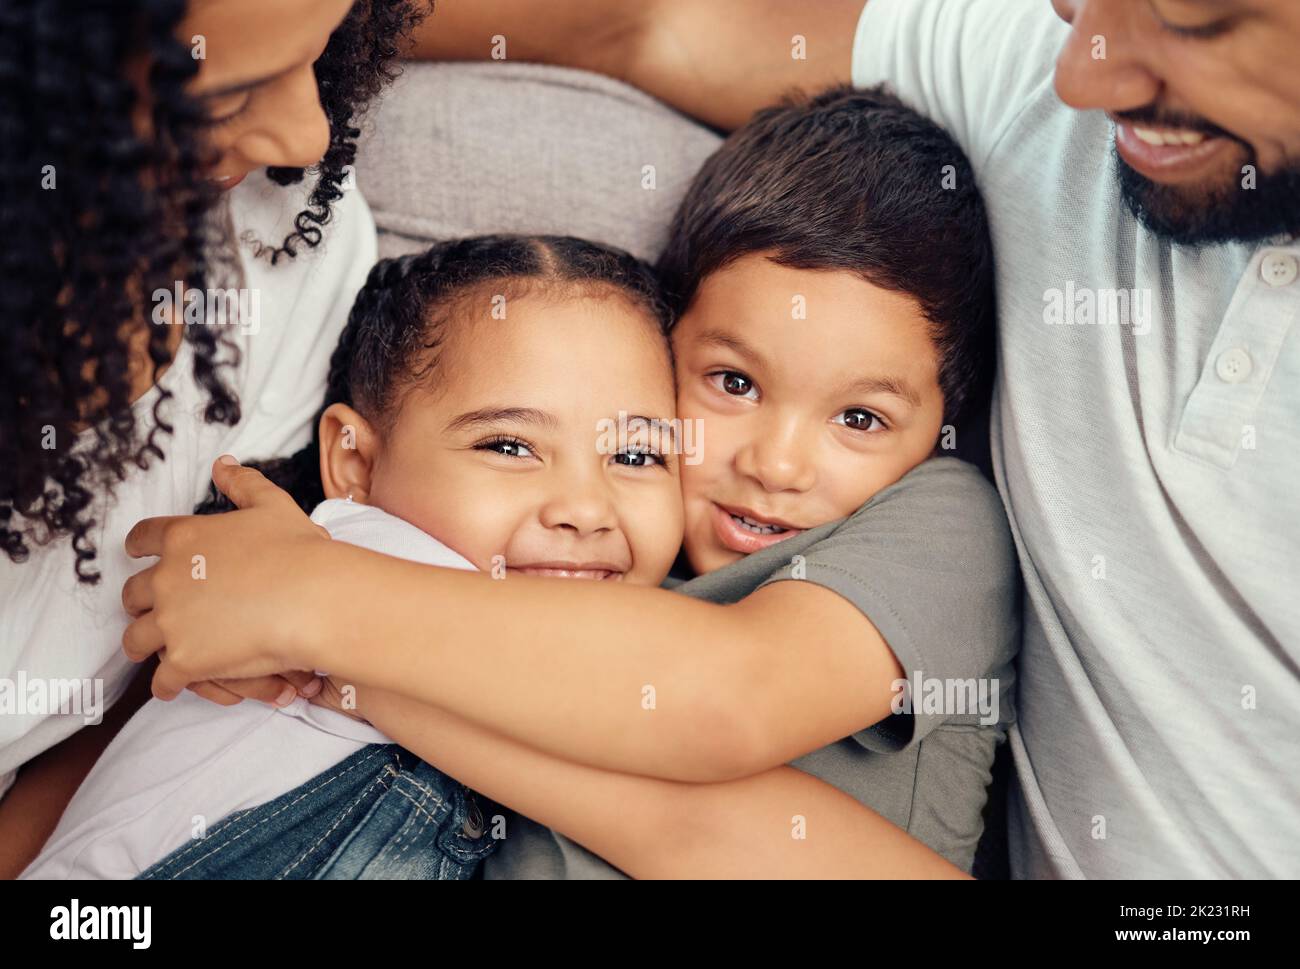 Portrait, happy family and children hug and bonding on a sofa, happy and relax with mother and father at home. Smile, relax and embracing kids Stock Photo